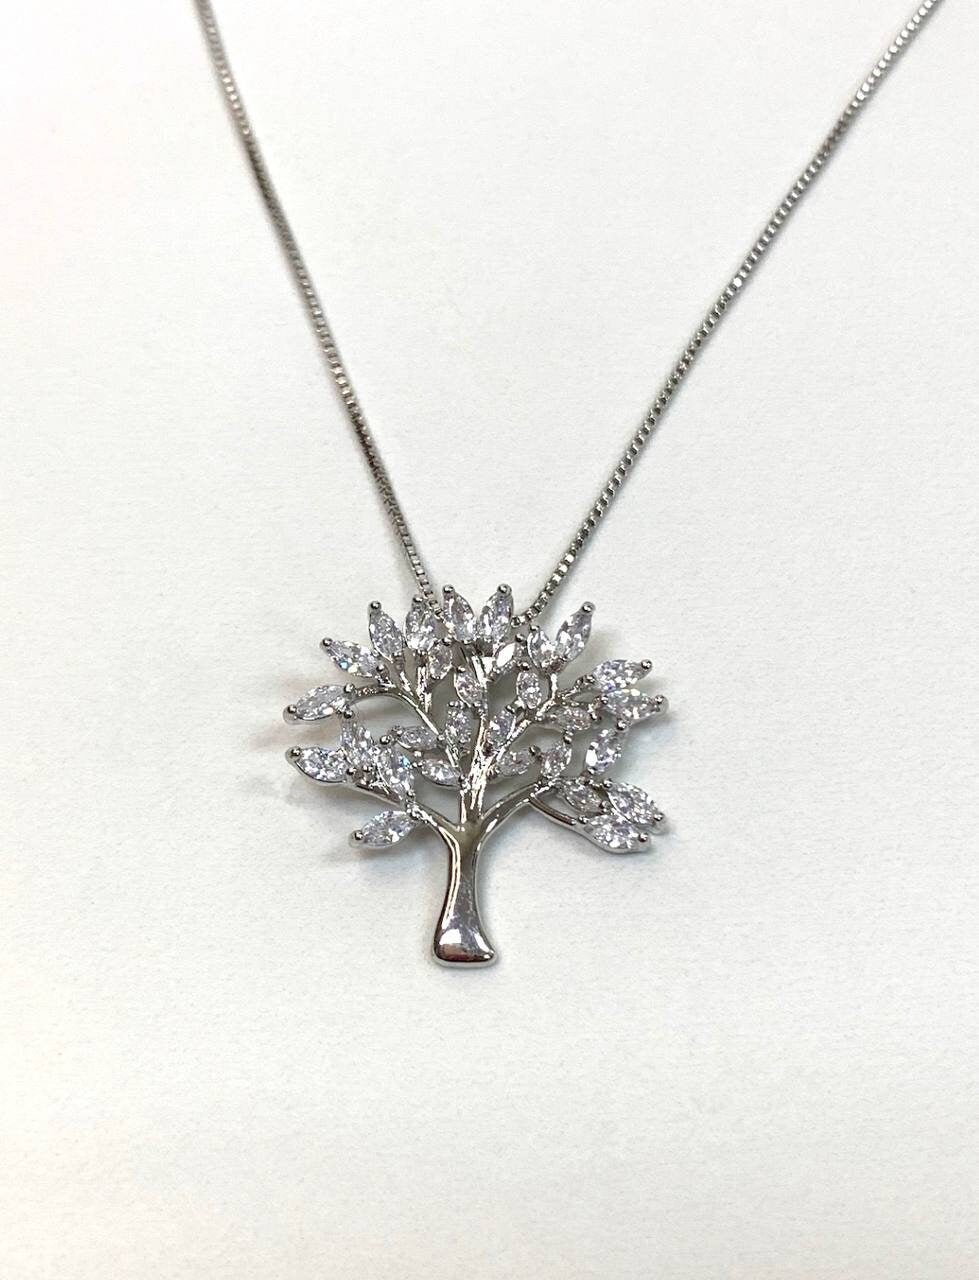 18k Gold Filled or Silver Filled, Box Chain Fancy Tree of Life Pendant,  Necklace with Cubic Zirconia, Wholesale Jewelry Making Supplies